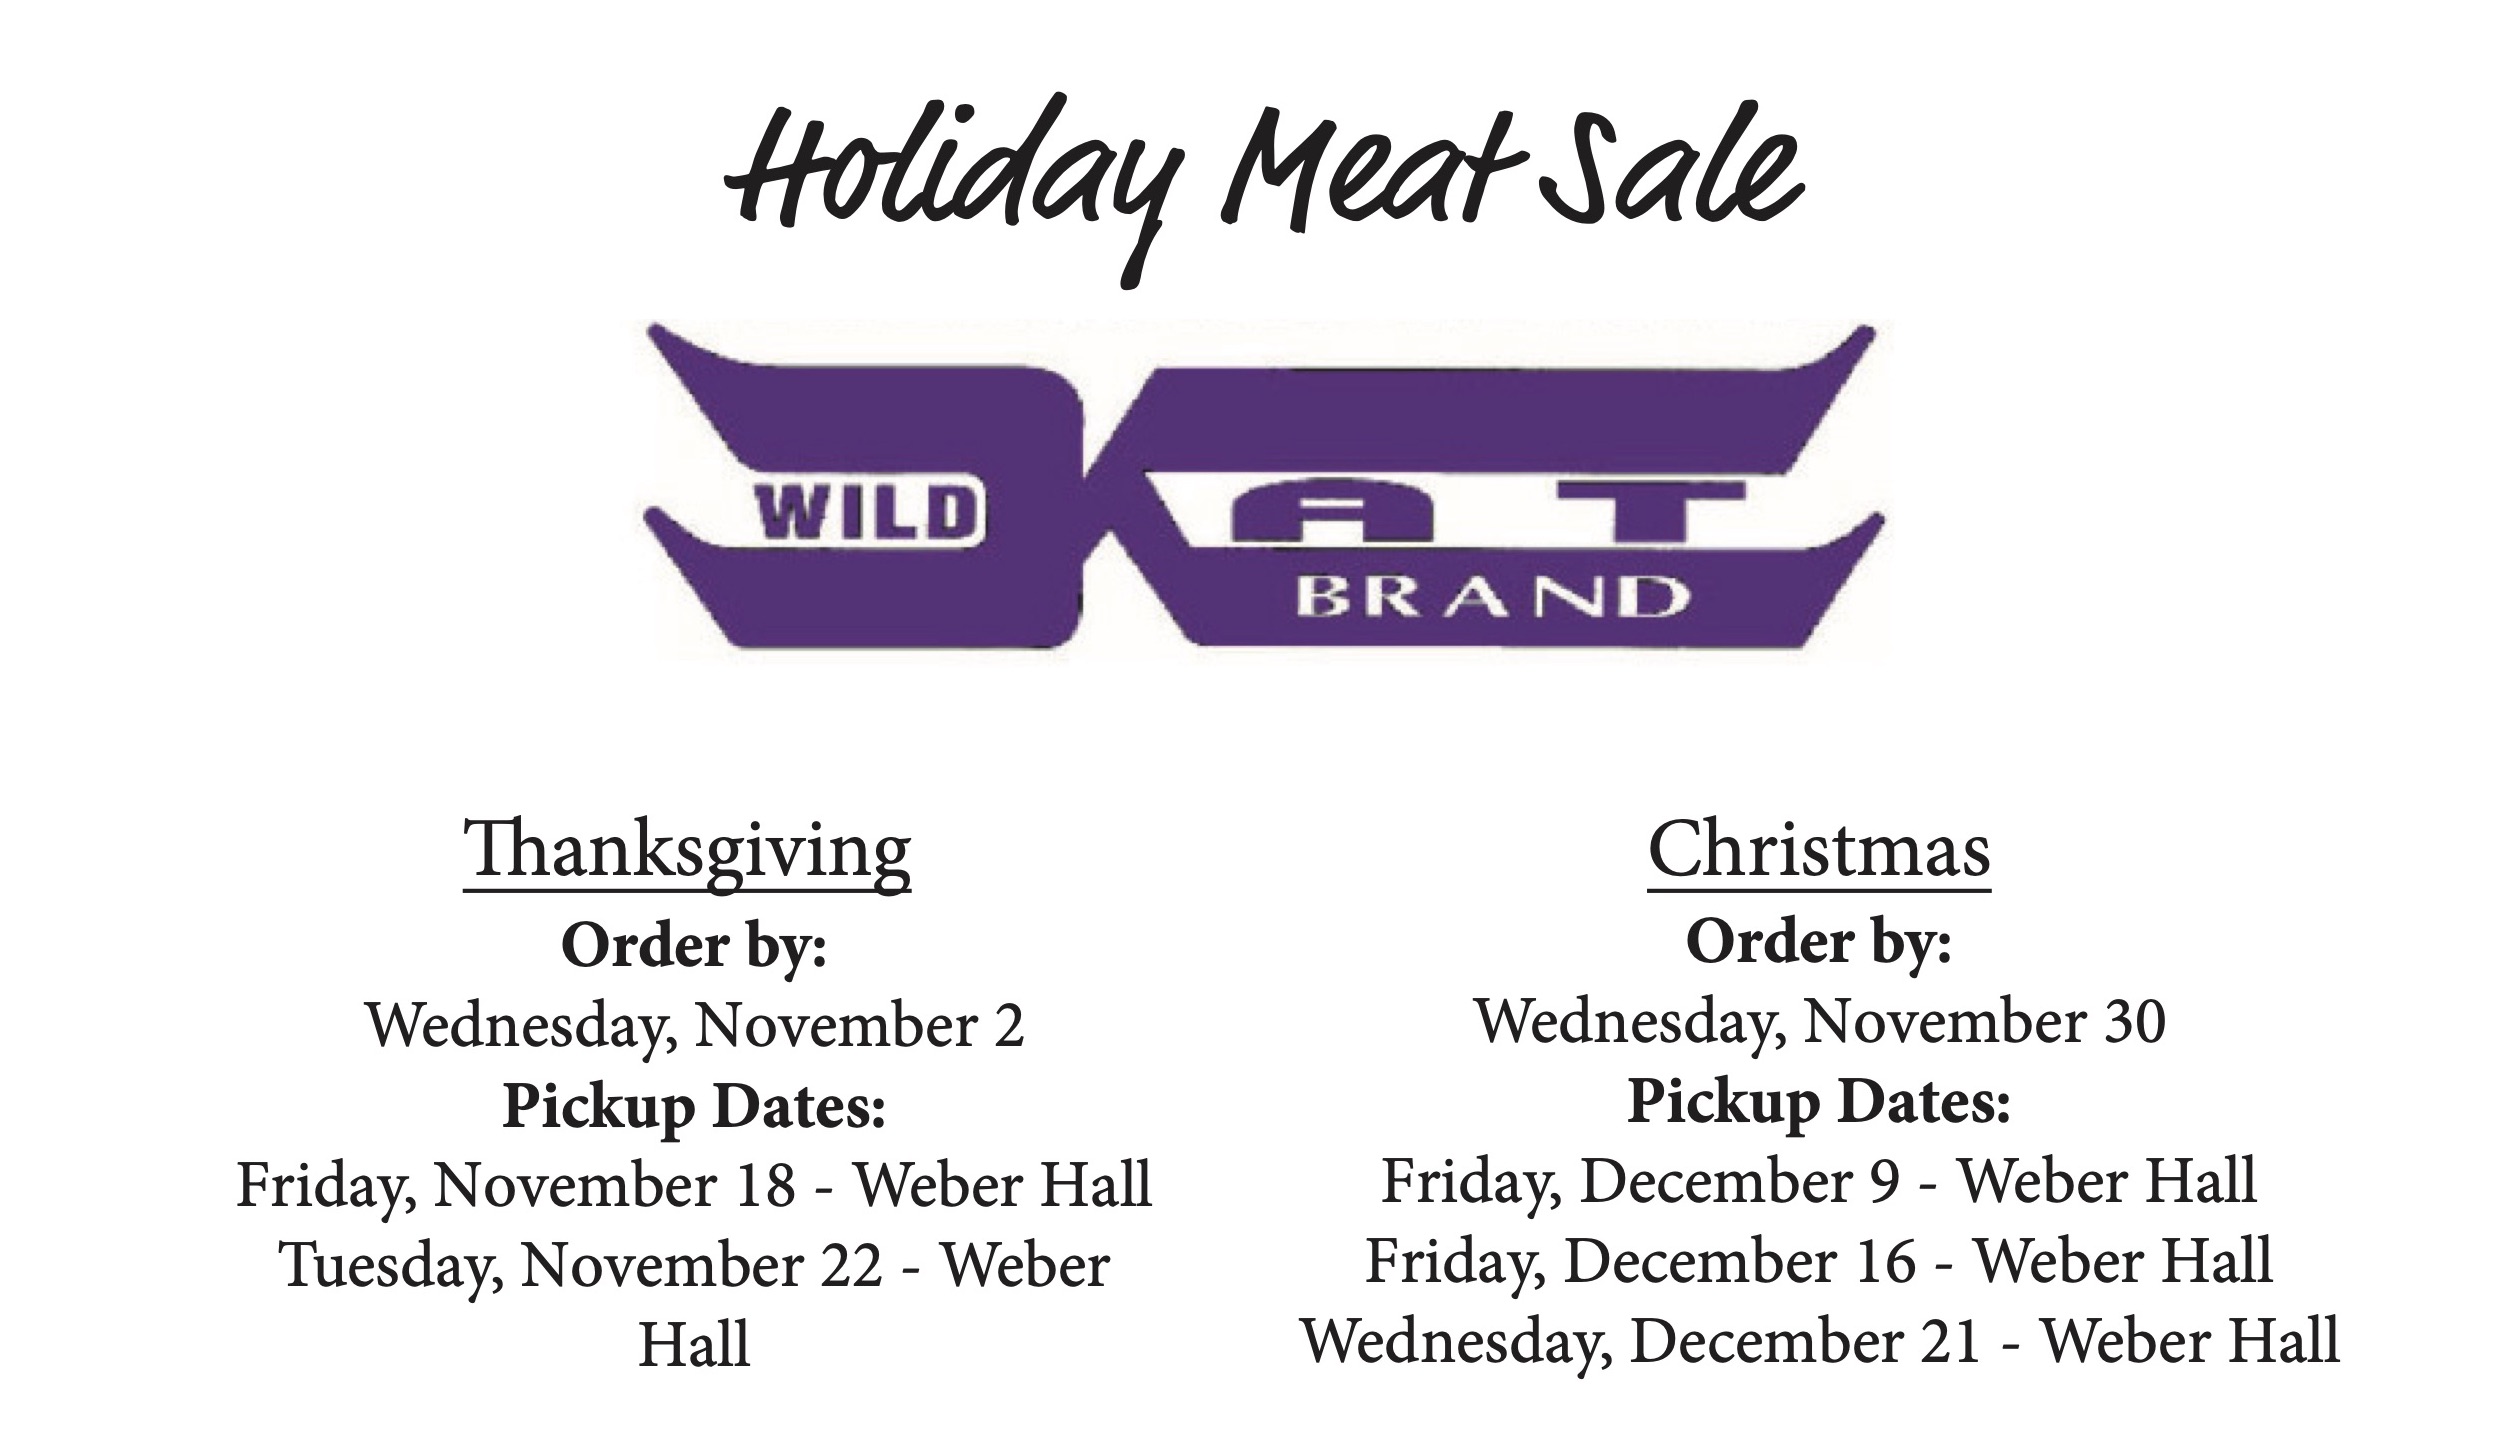 Holiday Meat Sale